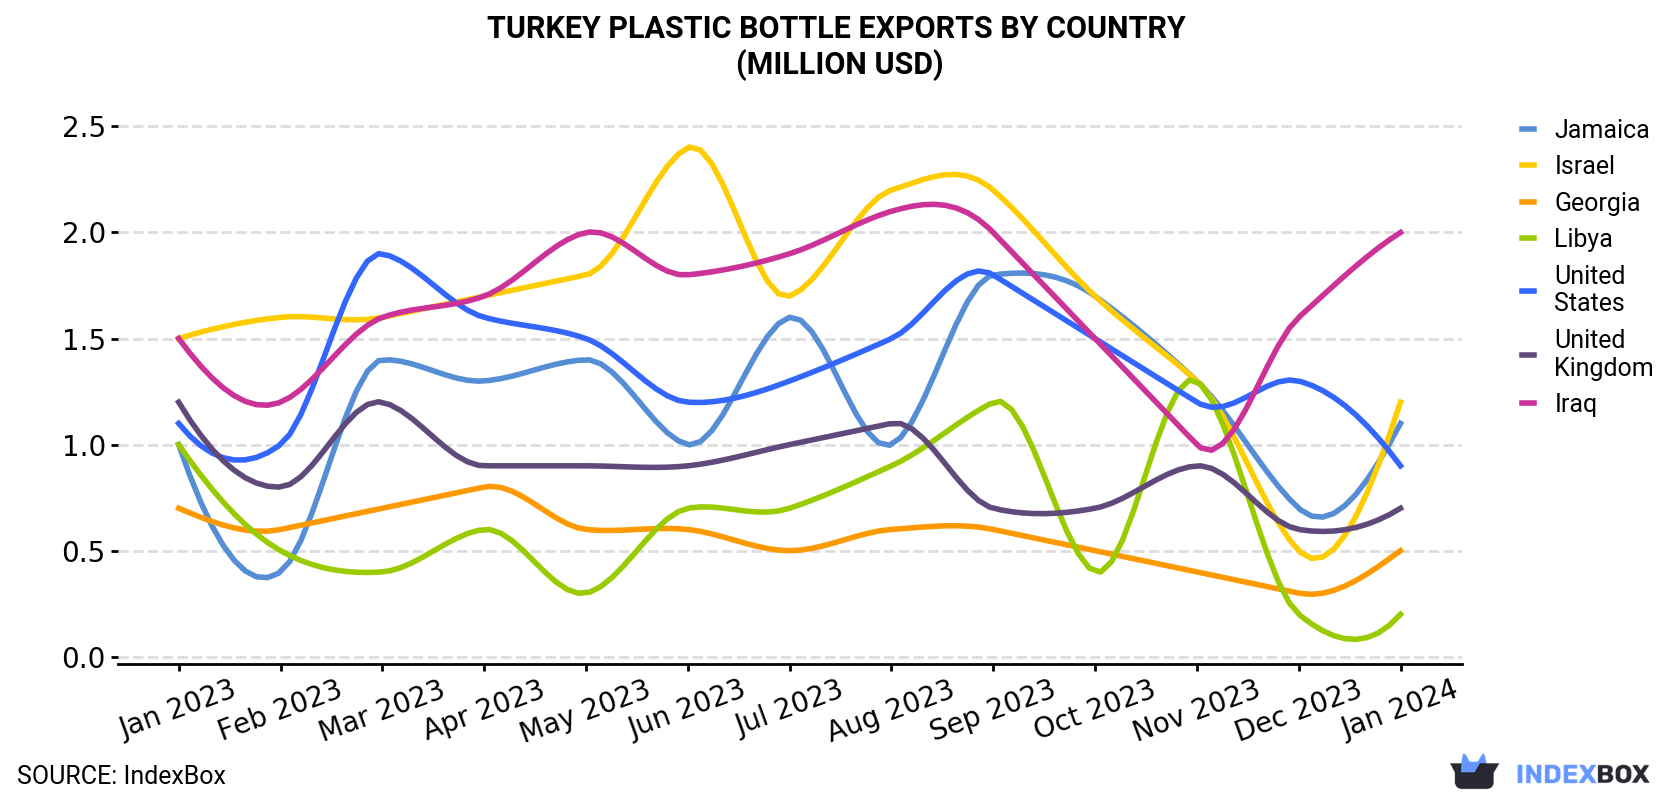 Turkey Plastic Bottle Exports By Country (Million USD)